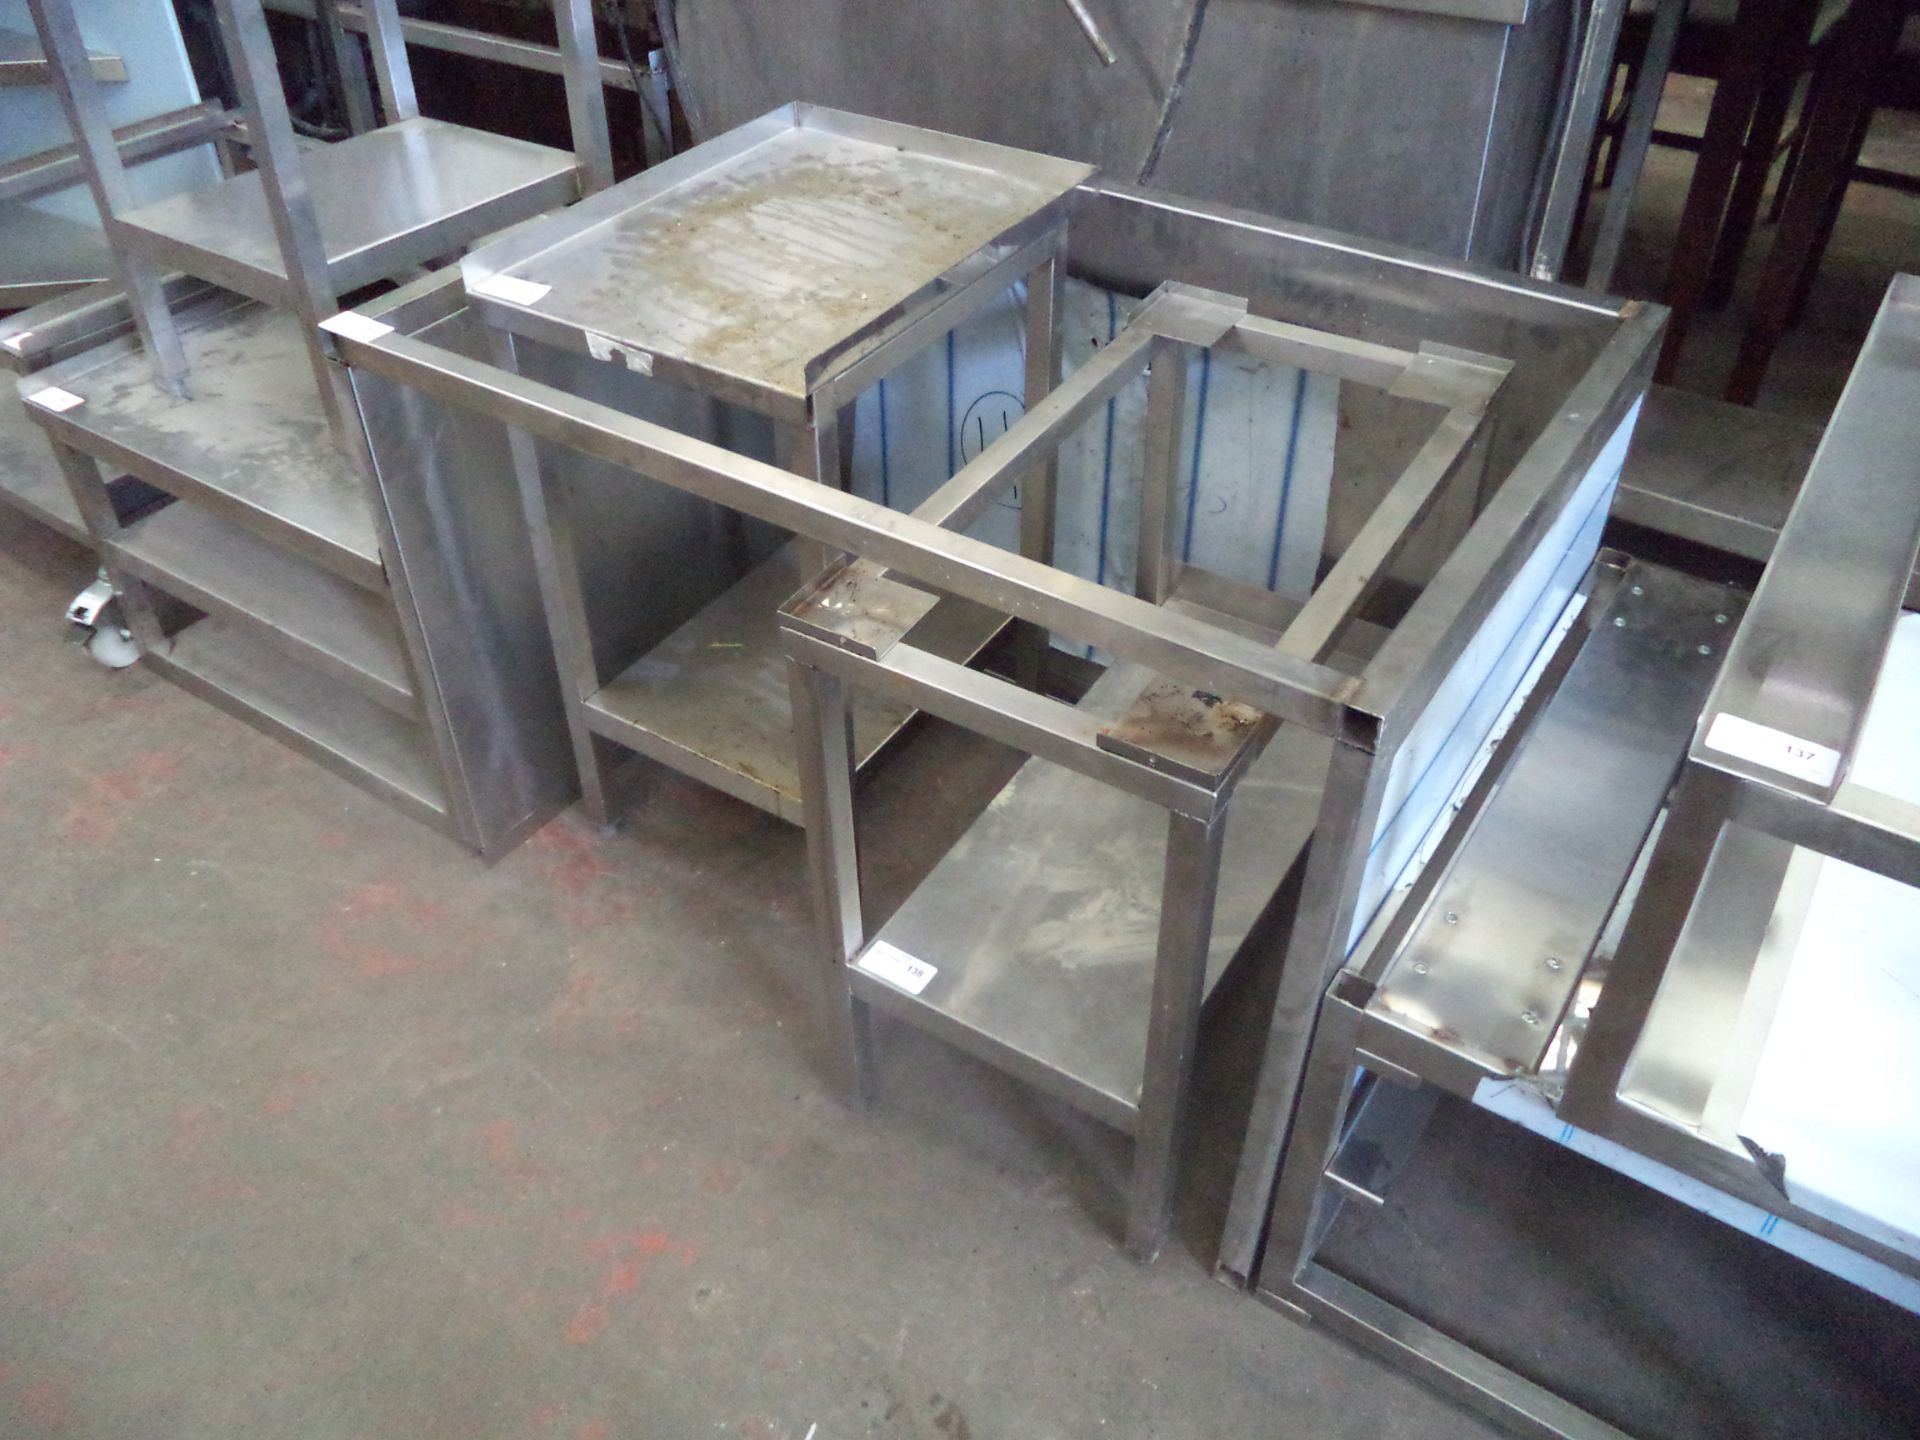 New S/S Oven Stand